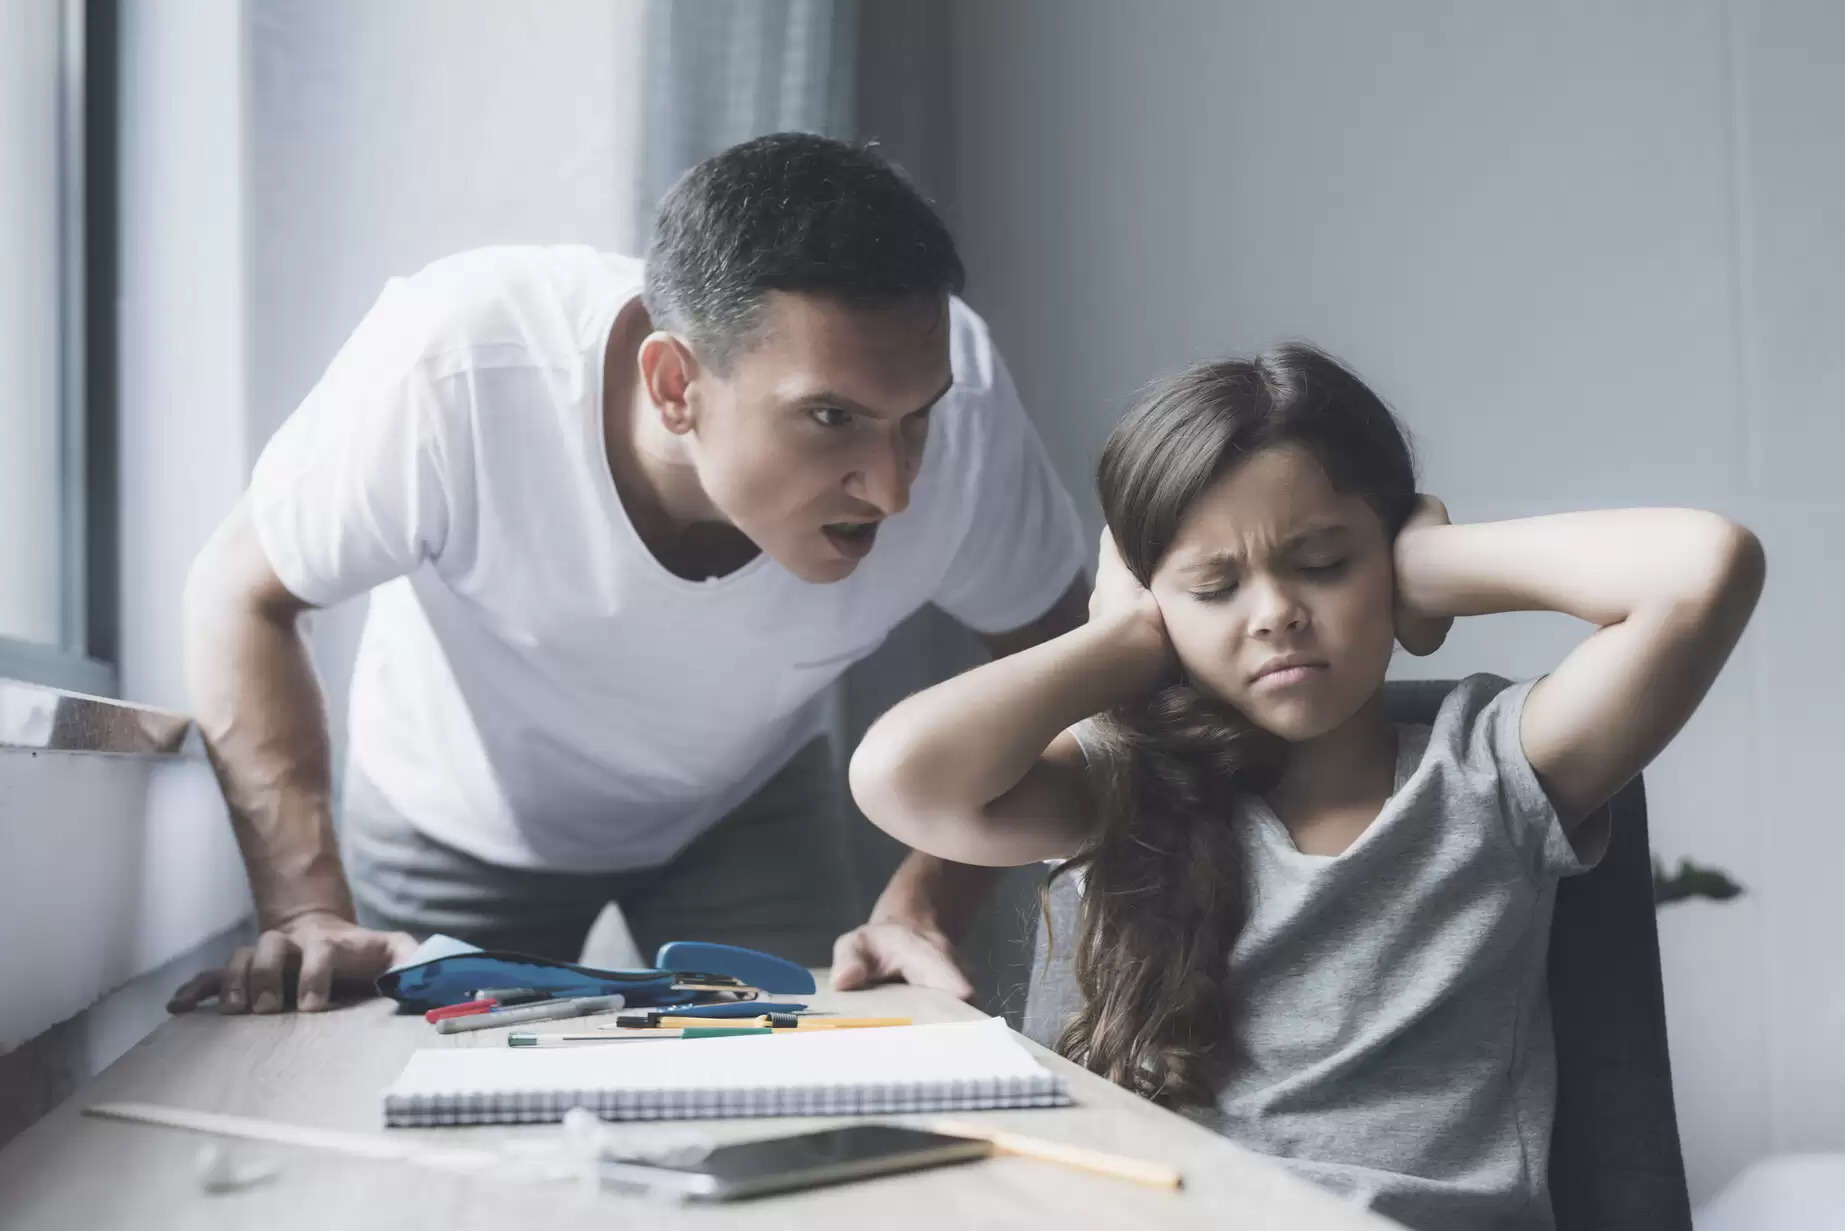 Parental burnout: Here is how to cope